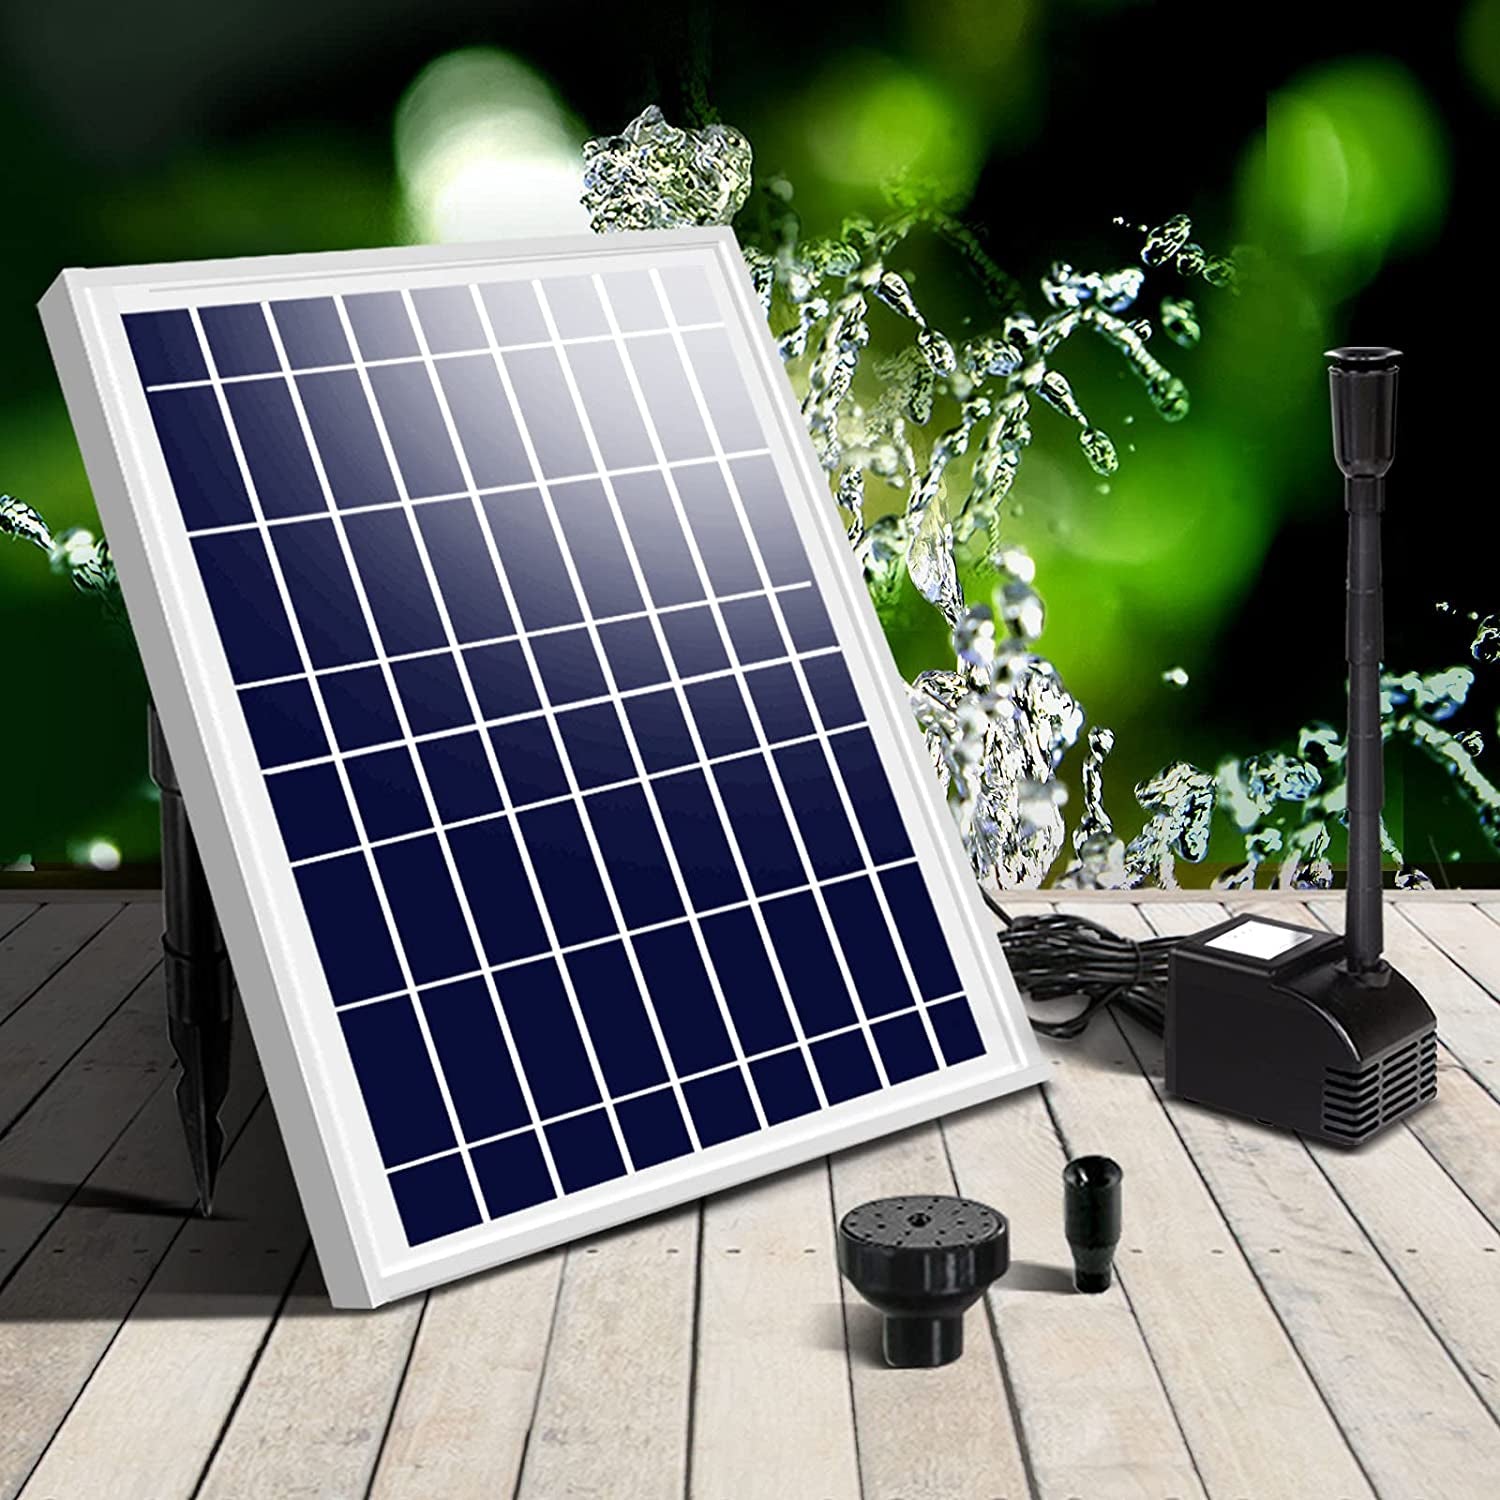 Gardeon, Gardeon Solar Powered Water Fountain Pump Kit with LED Light, 60W Solar Panel and Brushless DC Submersible Solar Fountain Pump for Patio, Garden and Pond